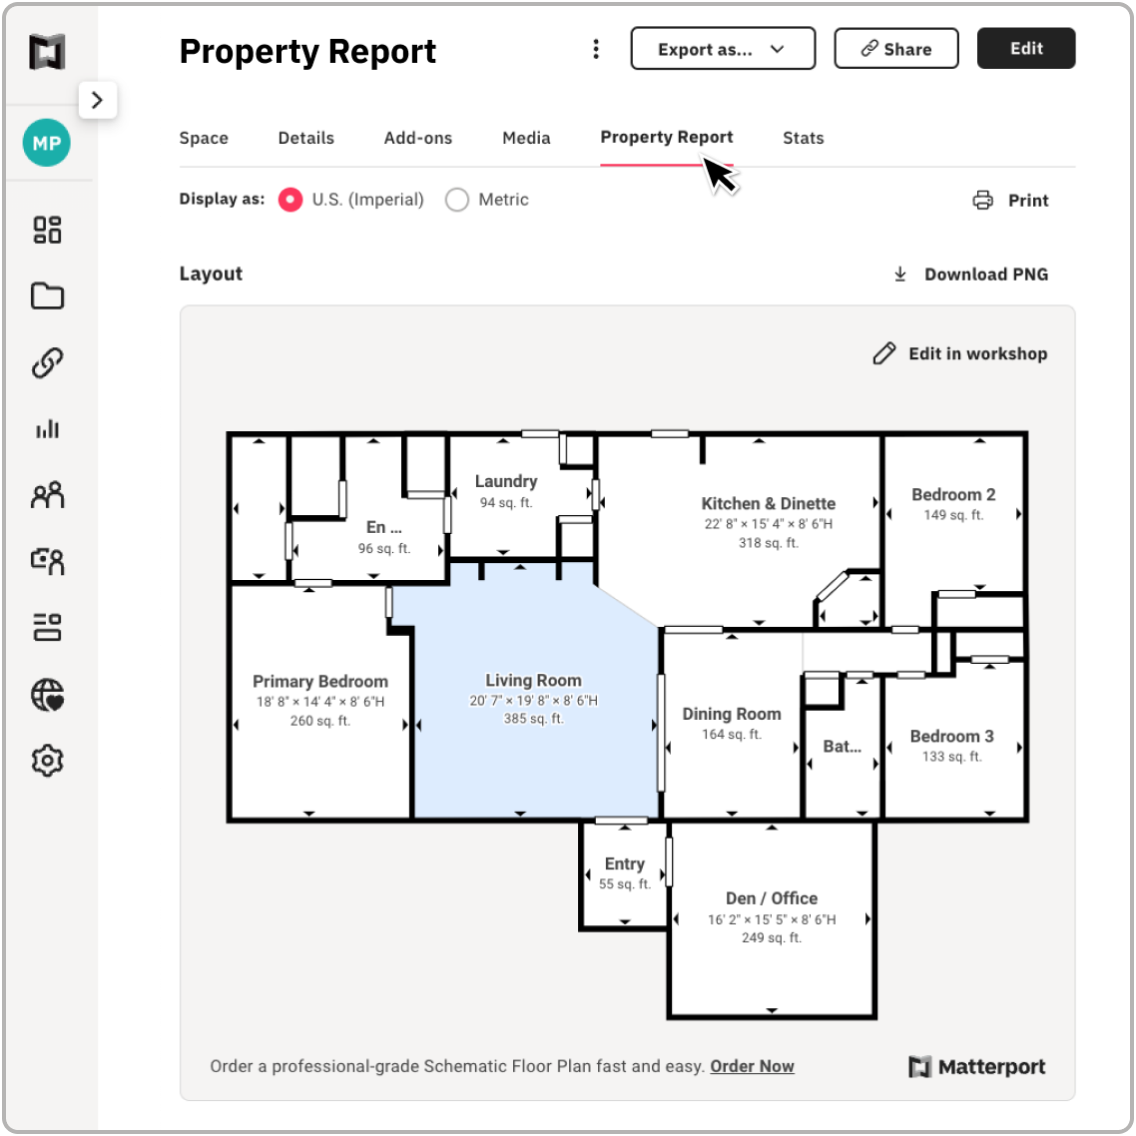 Property Report details within a Matterport model of a house